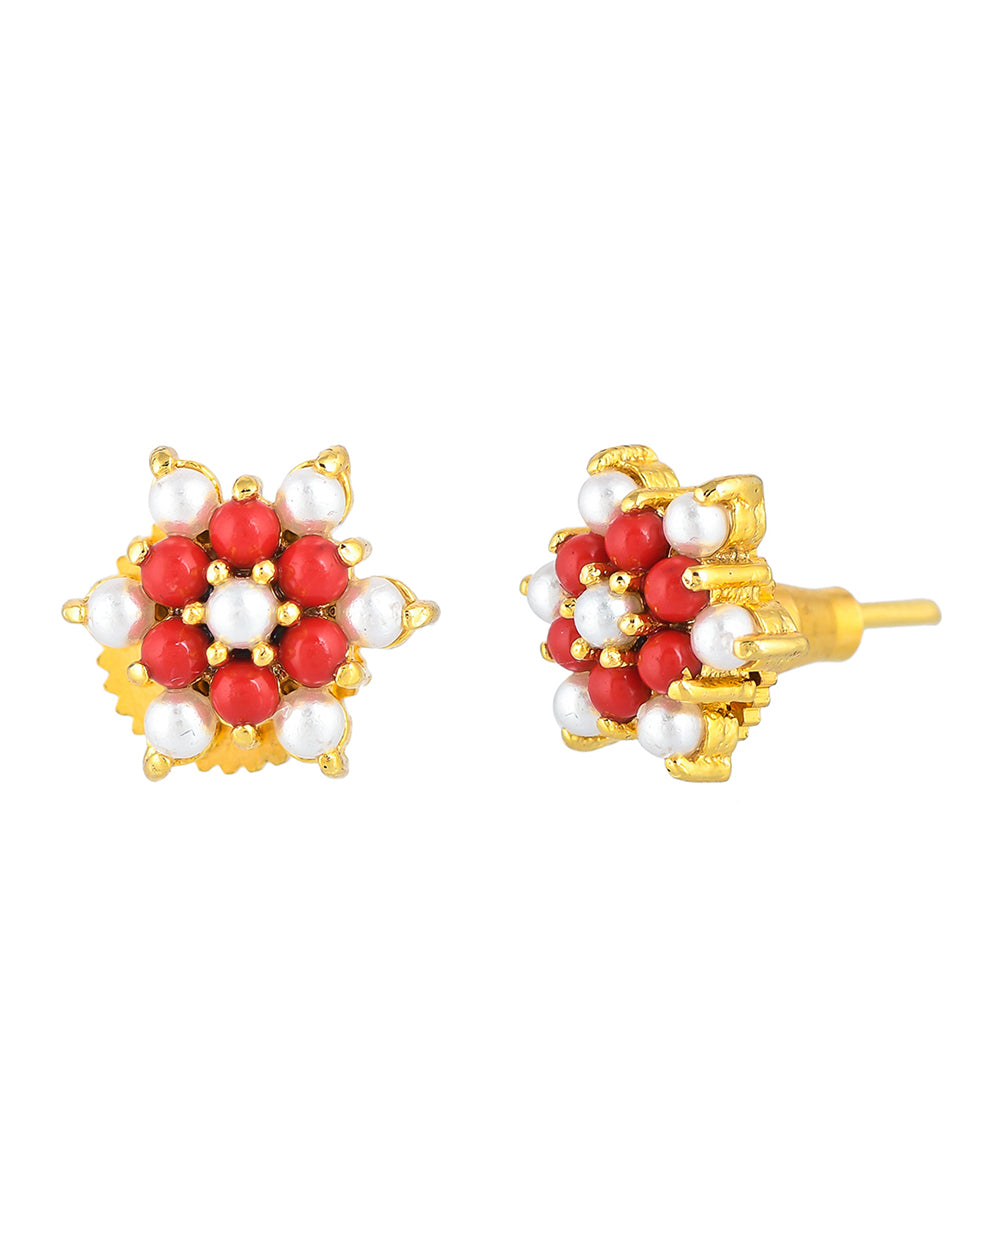 Women's Tiny Round Cut Red Cz Gems And White Pearl Stud Earrings - Voylla